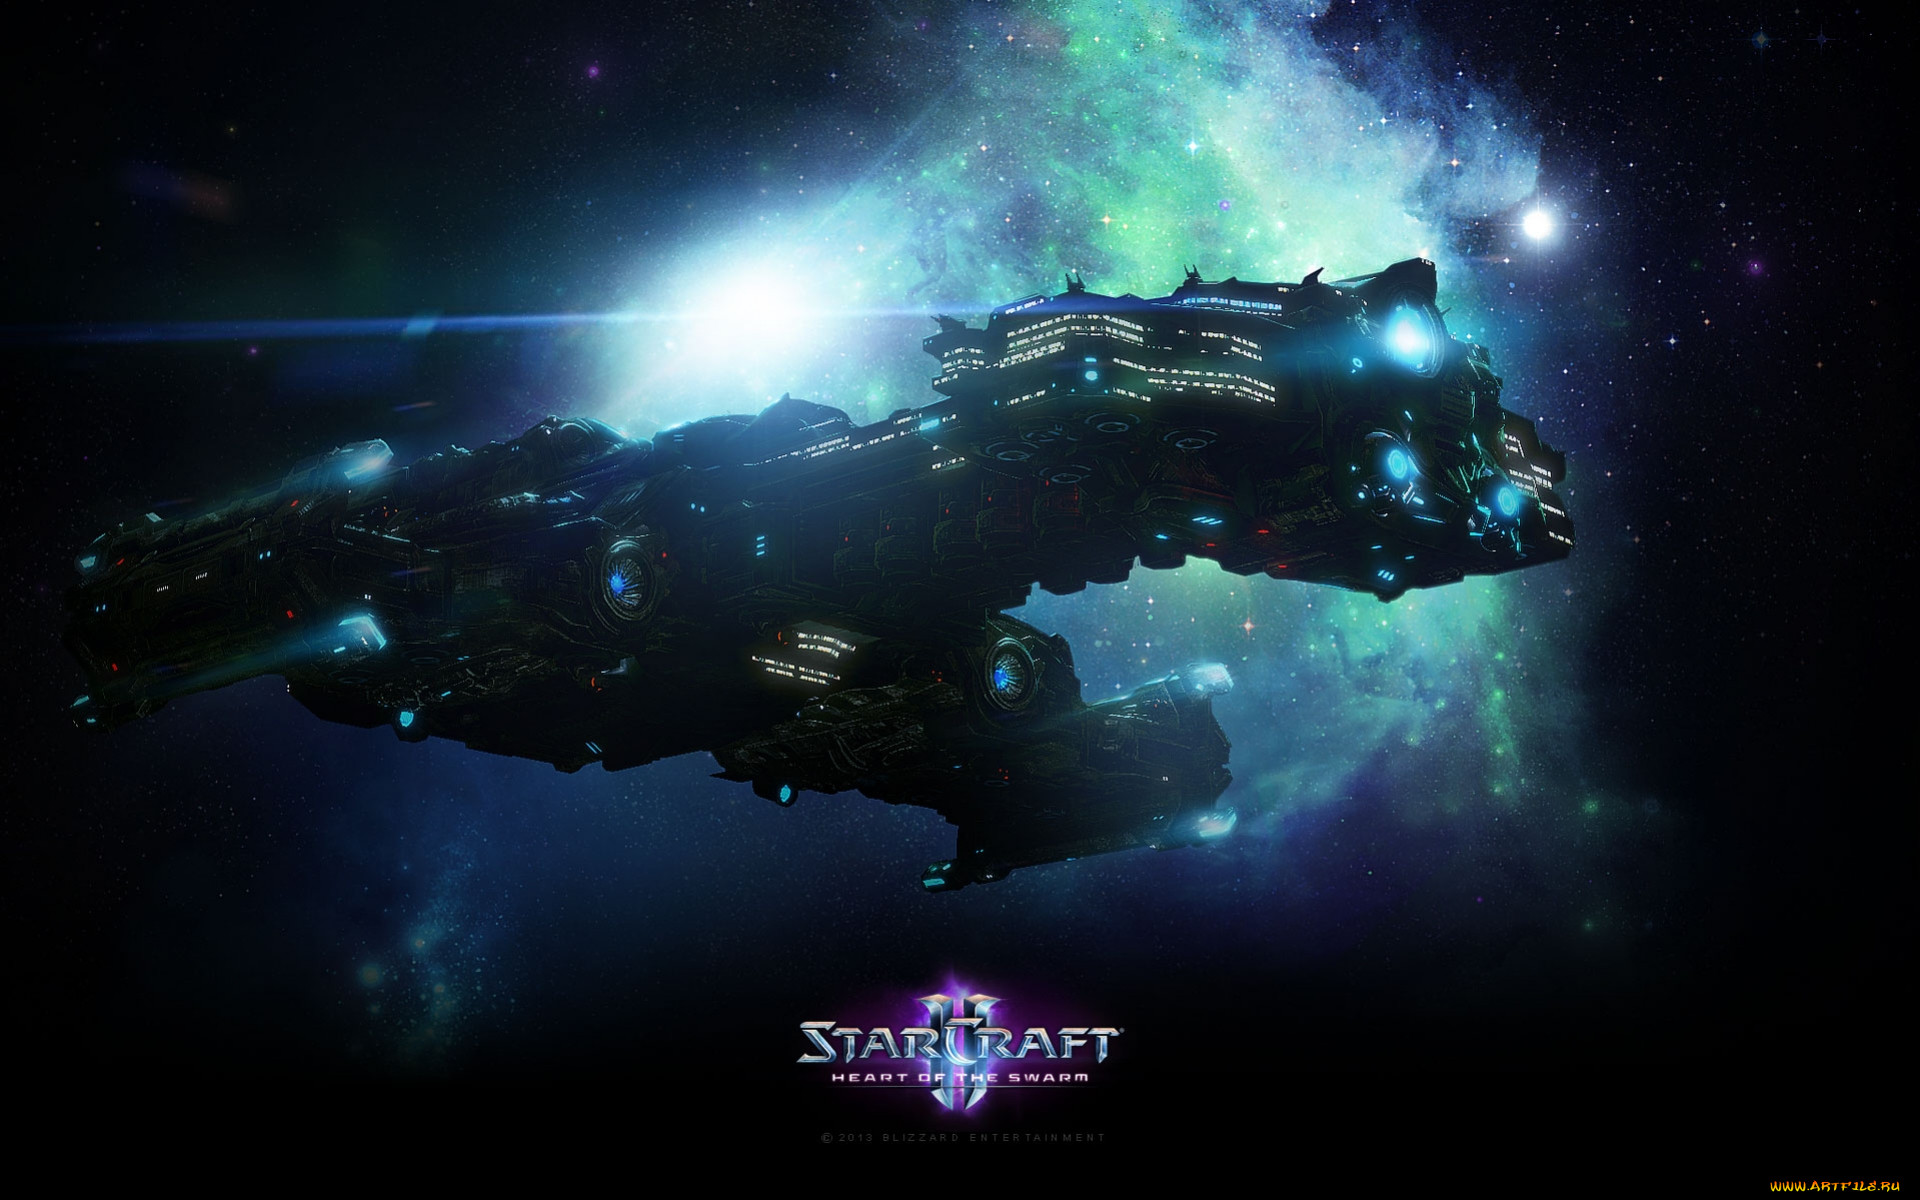  , starcraft ii,  heart of the swarm, , , heart, of, the, swarm, starcraft, 2